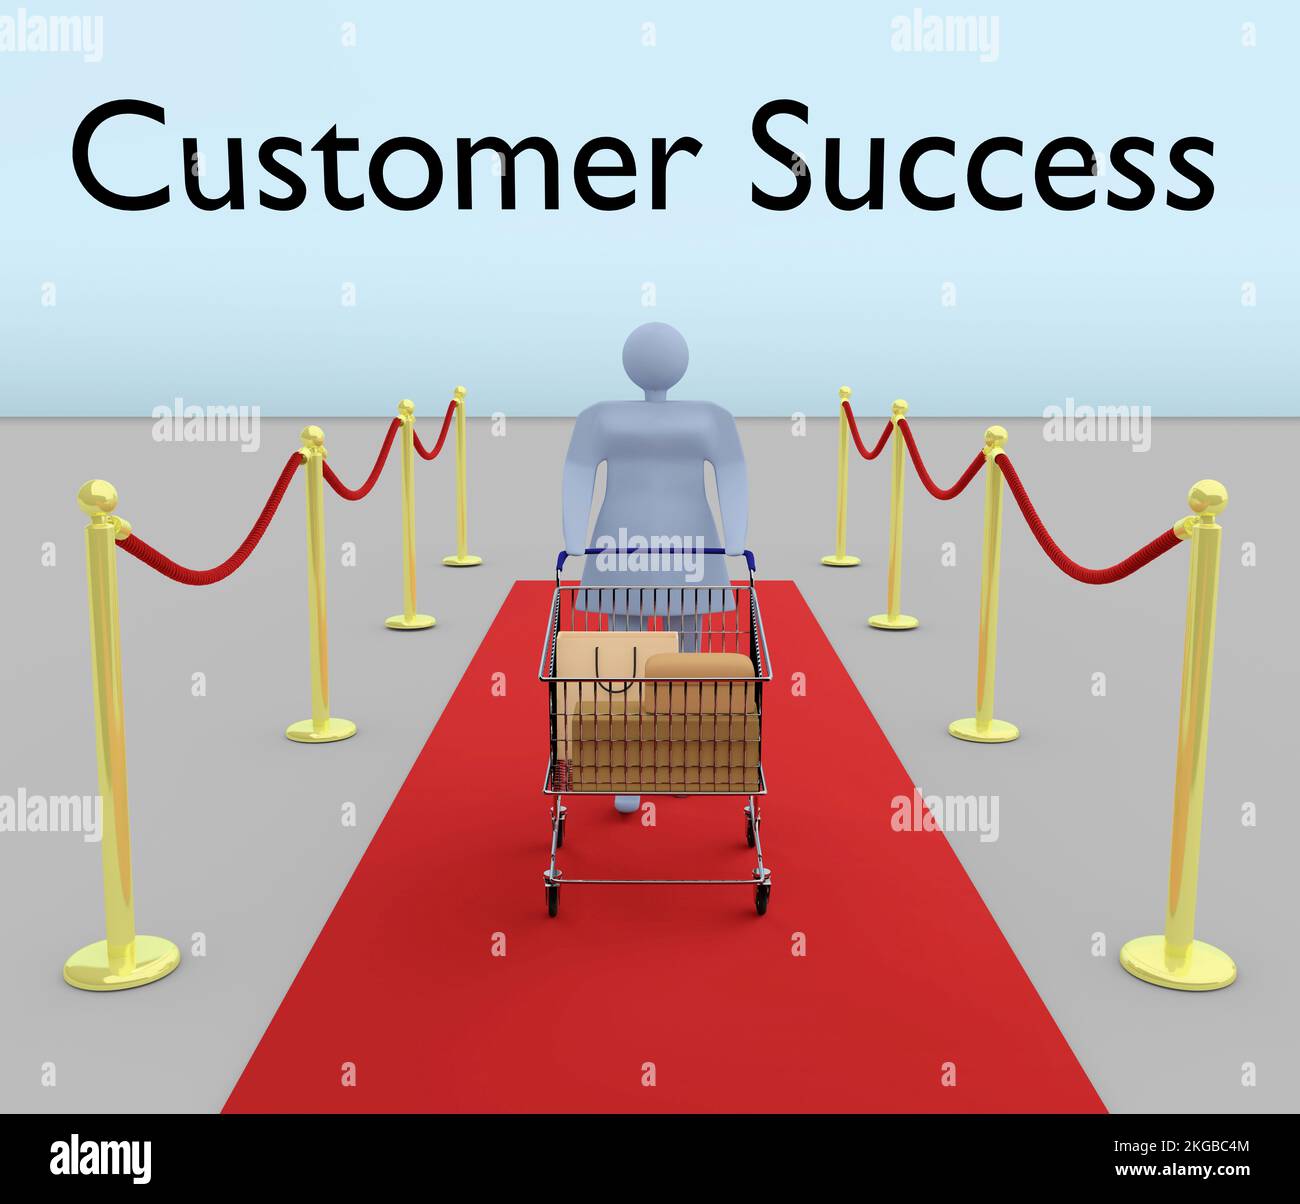 3D illustration of a woman silhouette pushing a shopping cart on a red carpet, with the title Customer Success. Stock Photo